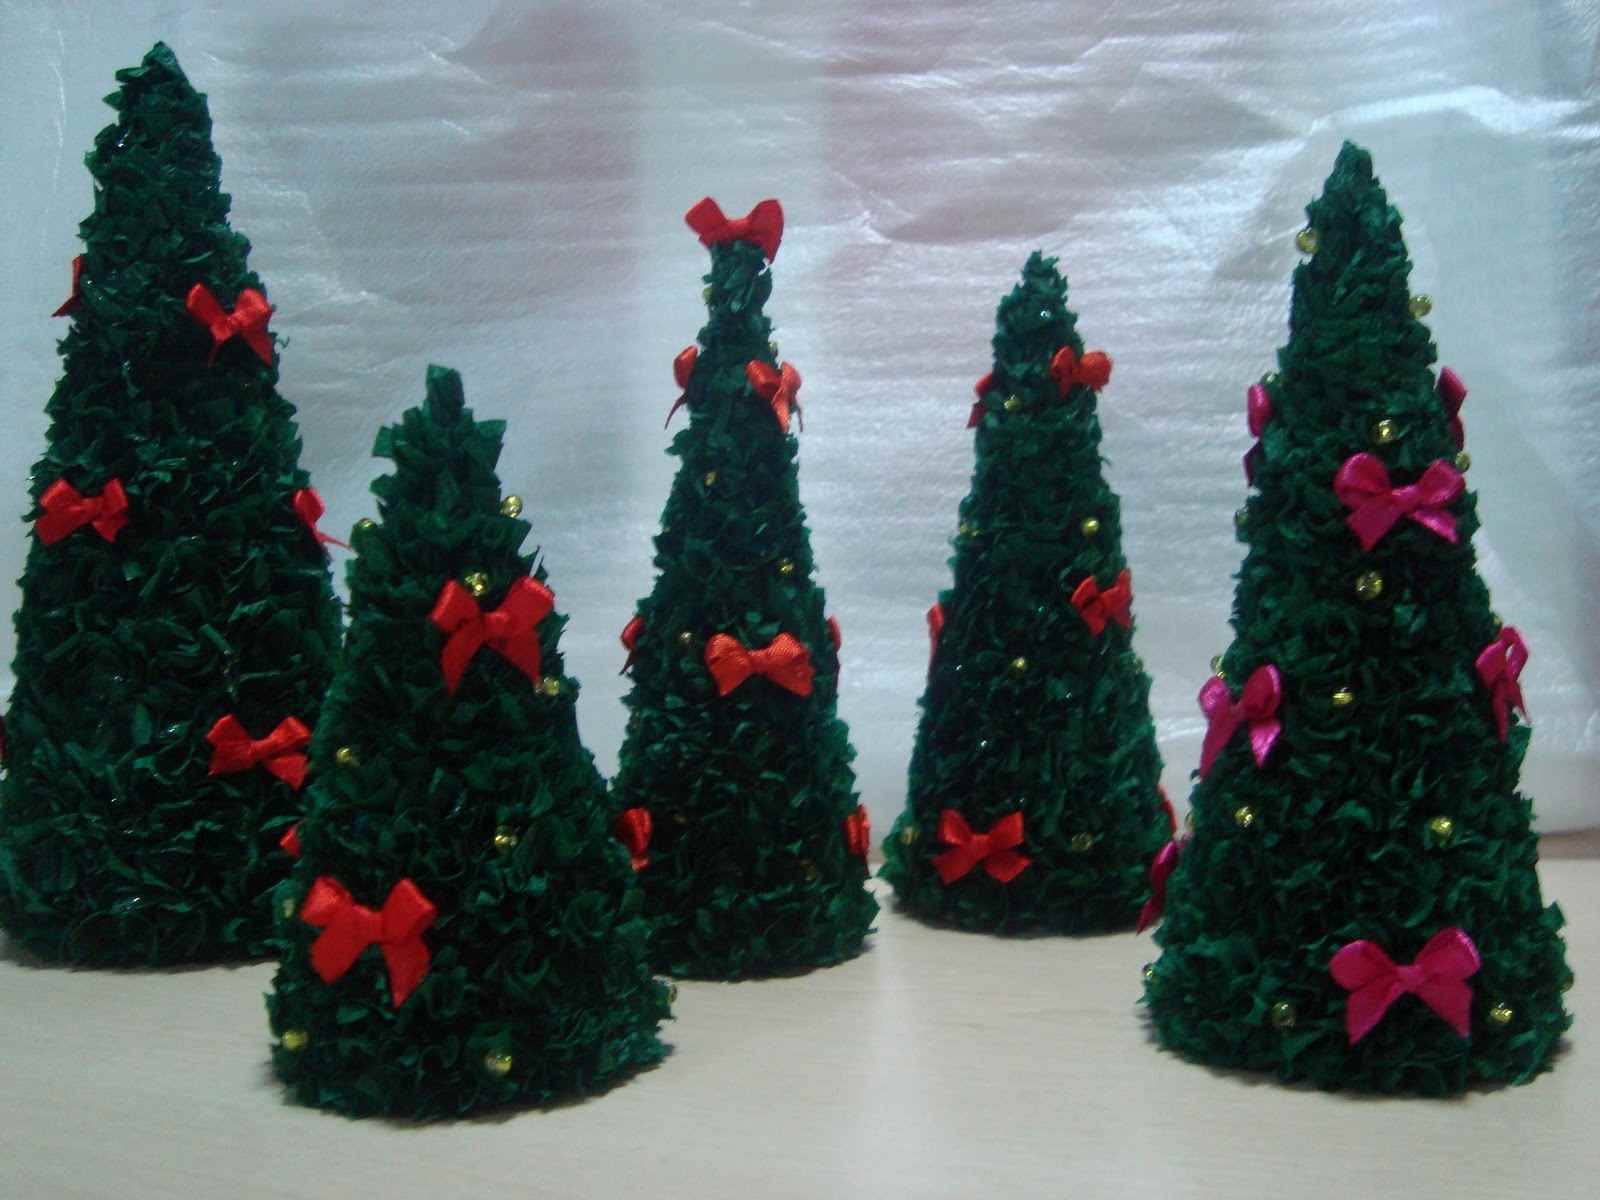 an example of creating an unusual Christmas tree from paper yourself